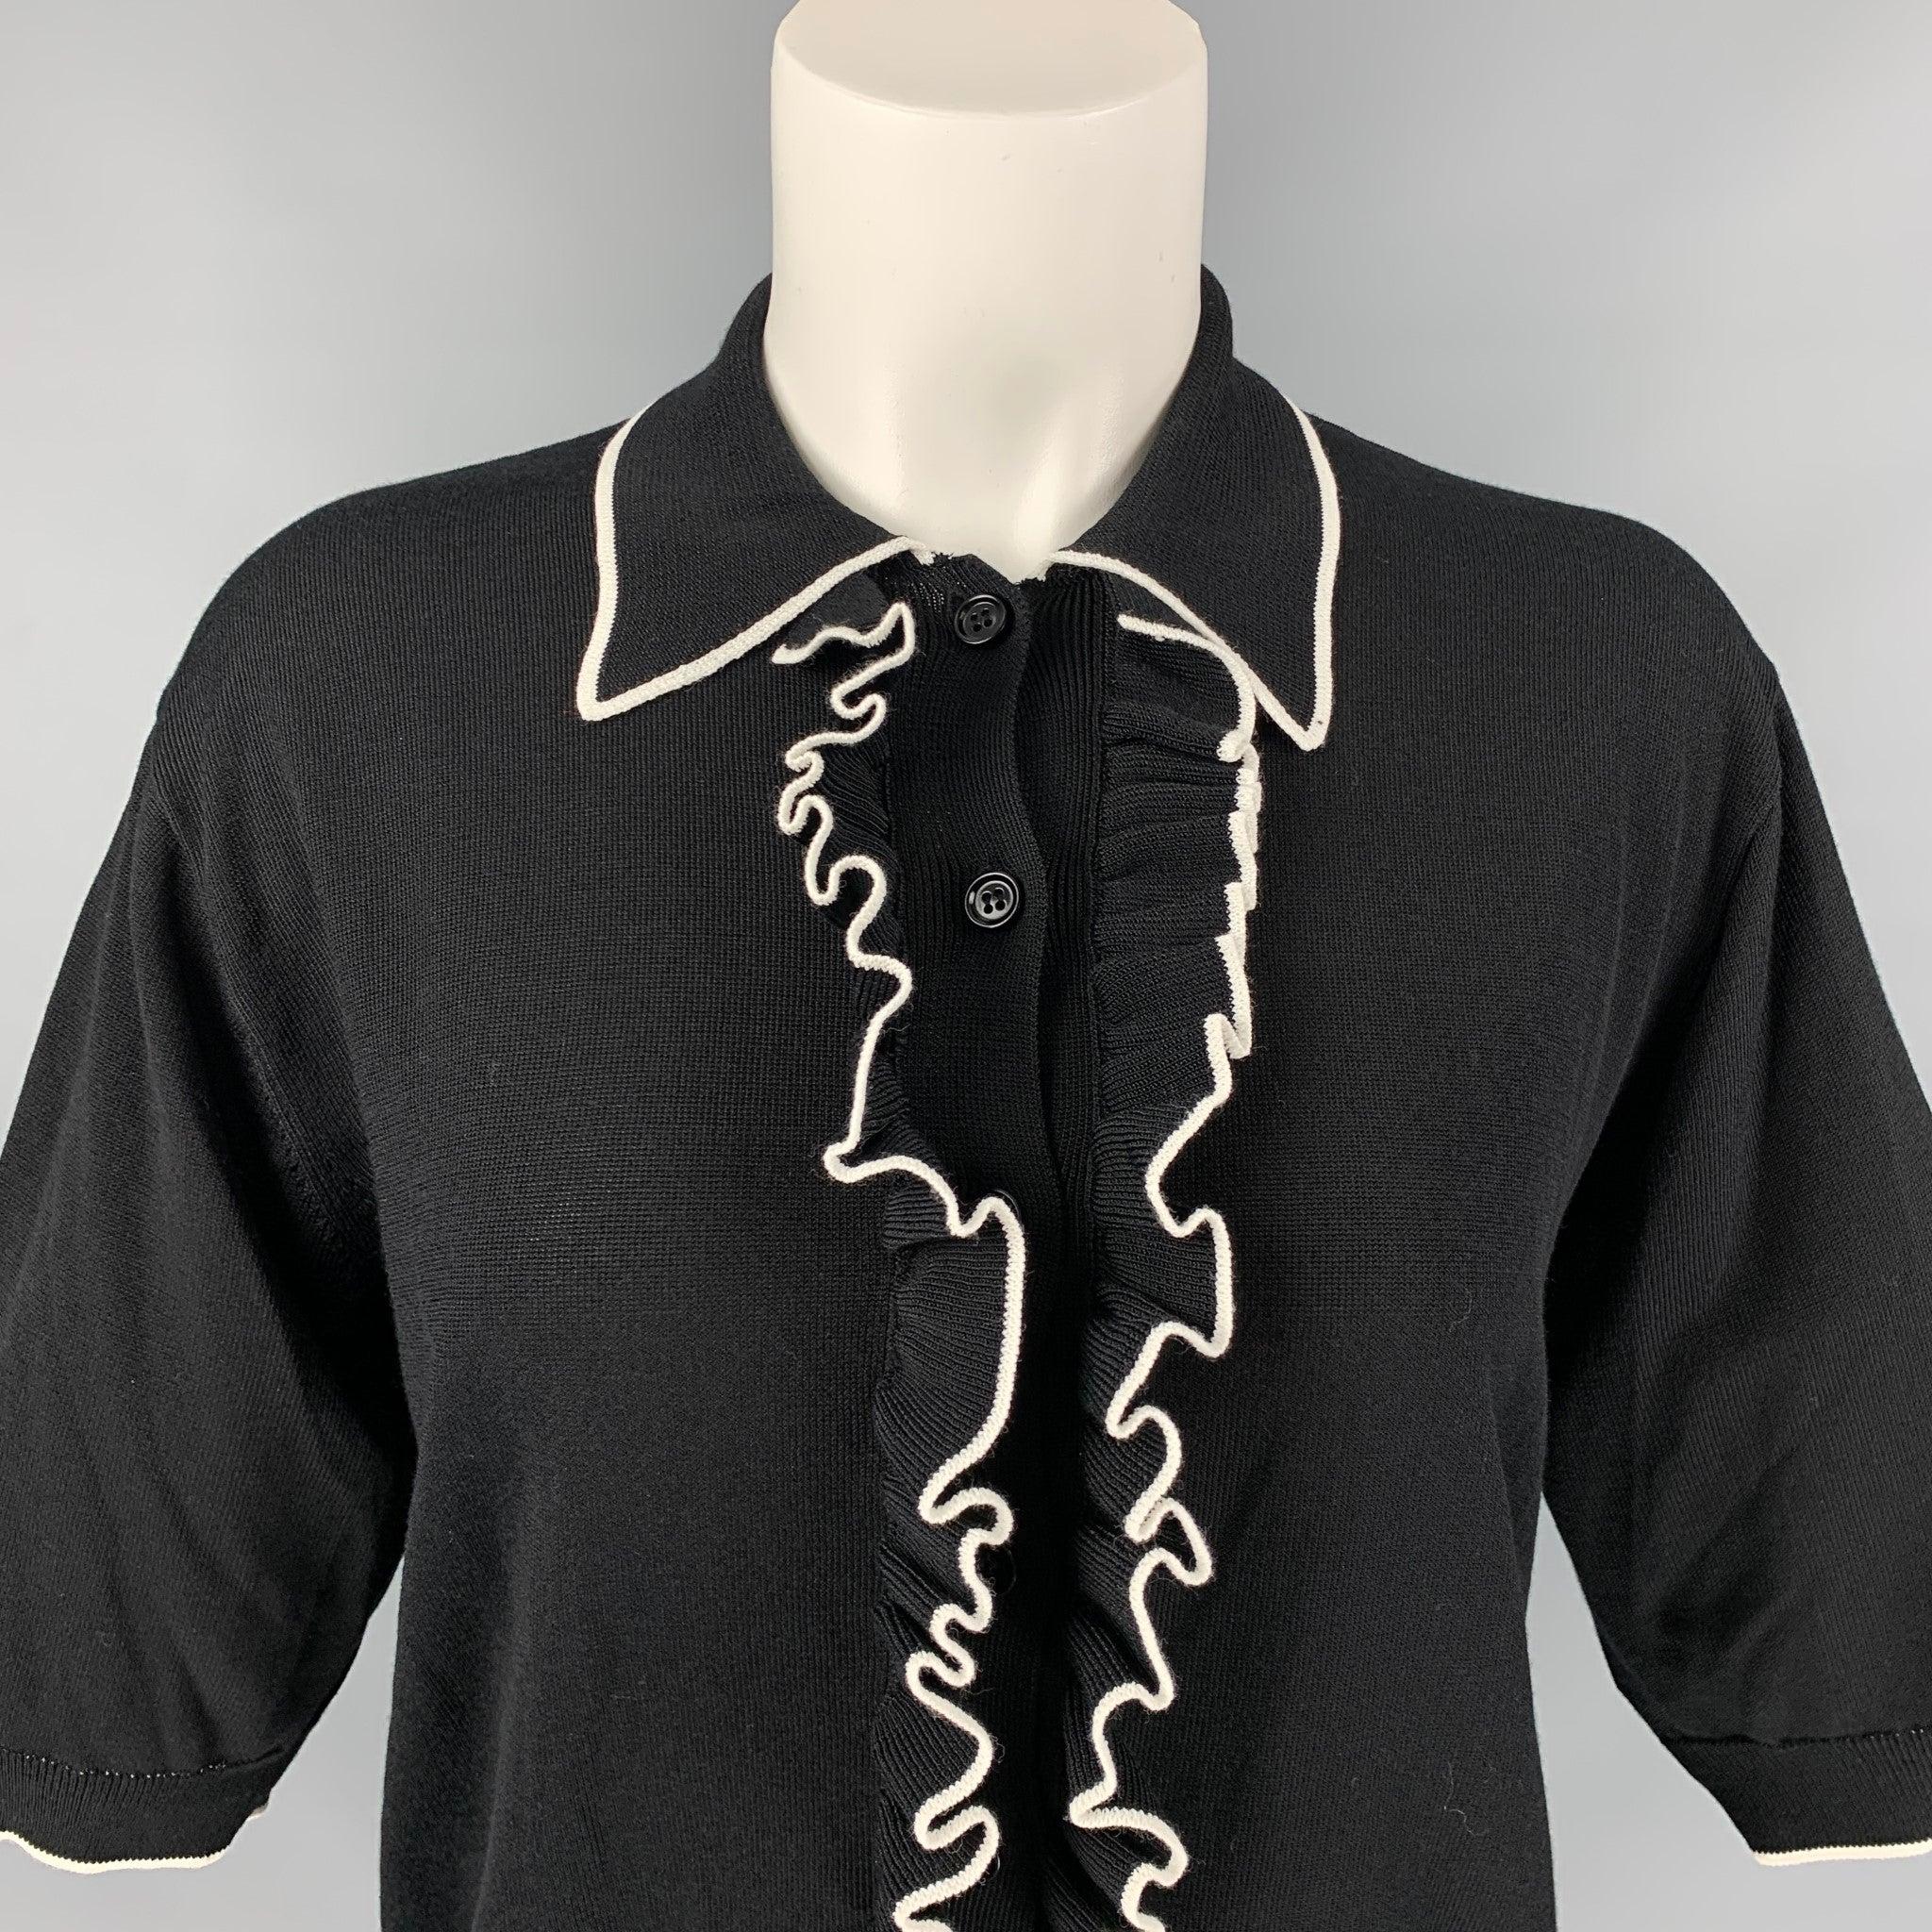 DRIES VAN NOTEN polo shirt comes in a black & white viscose / cotton featuring a ruffled trim, pointed collar, and a buttoned closure.
Excellent
Pre-Owned Condition. 

Marked:   S 

Measurements: 
 
Shoulder: 17 inches  Bust: 36 inches  Sleeve: 12